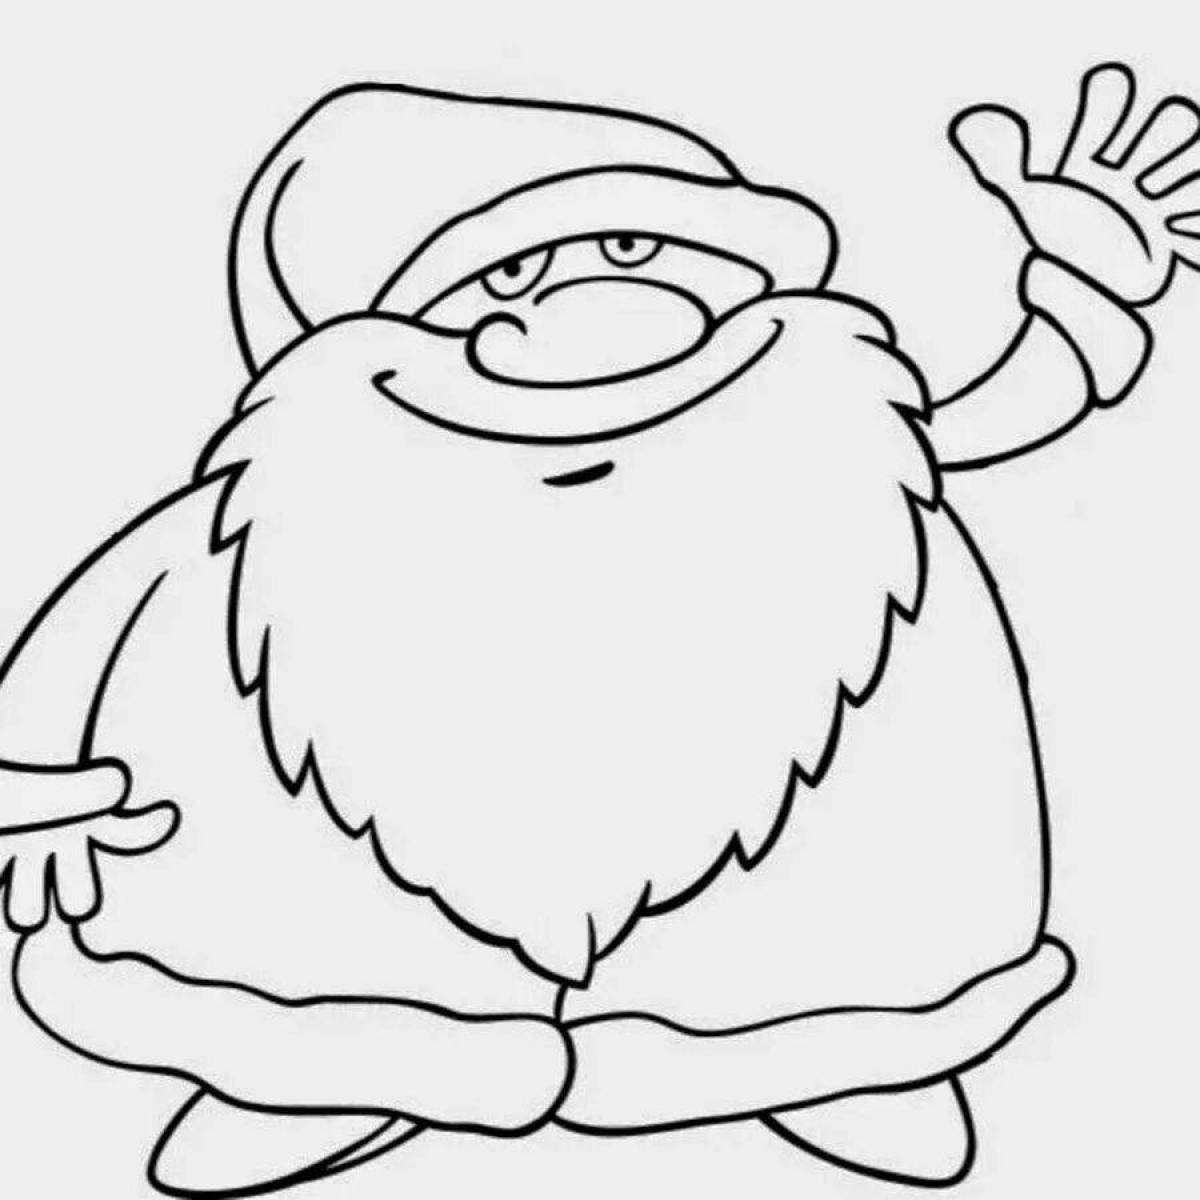 Coloring book glowing little santa claus